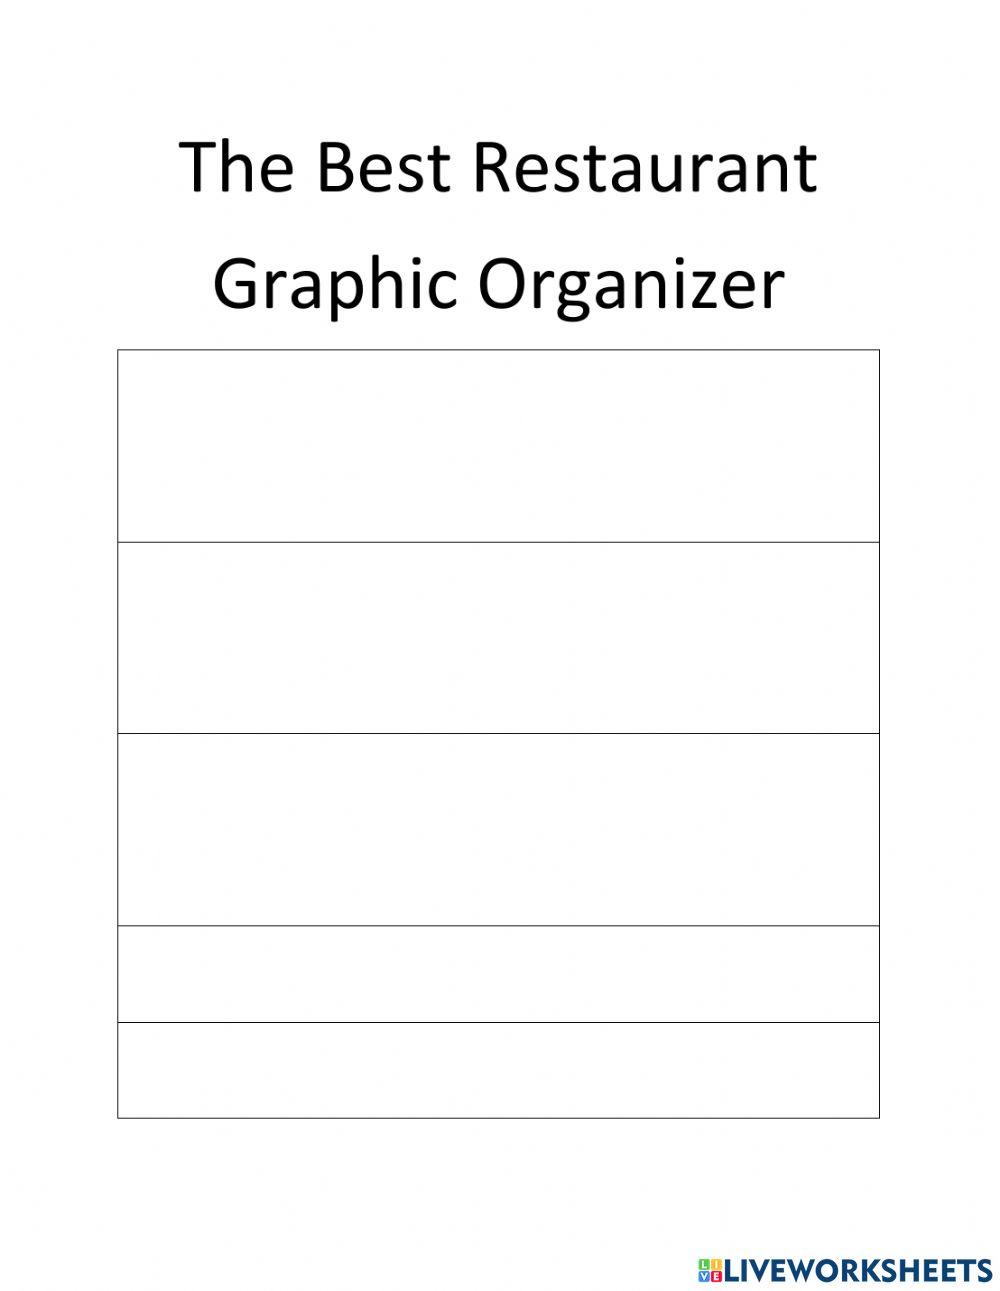 Restaurant Opinion Writing Assignment